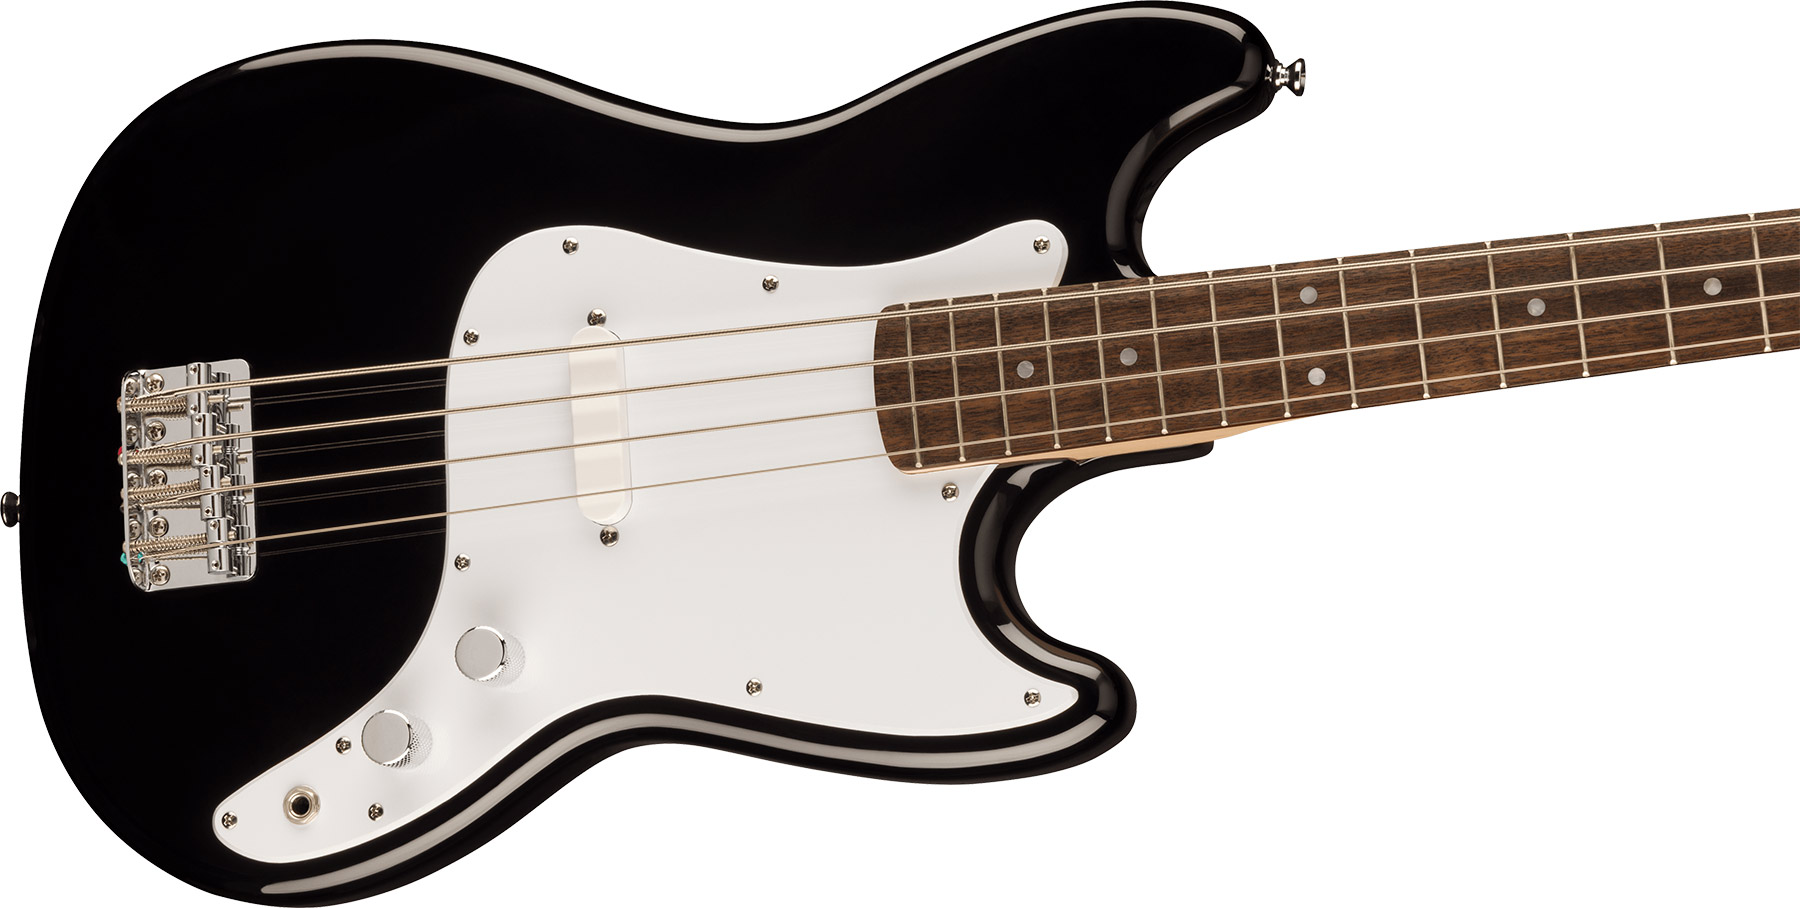 Squier Bronco Bass Sonic Lau - Black - Solid body electric bass - Variation 2